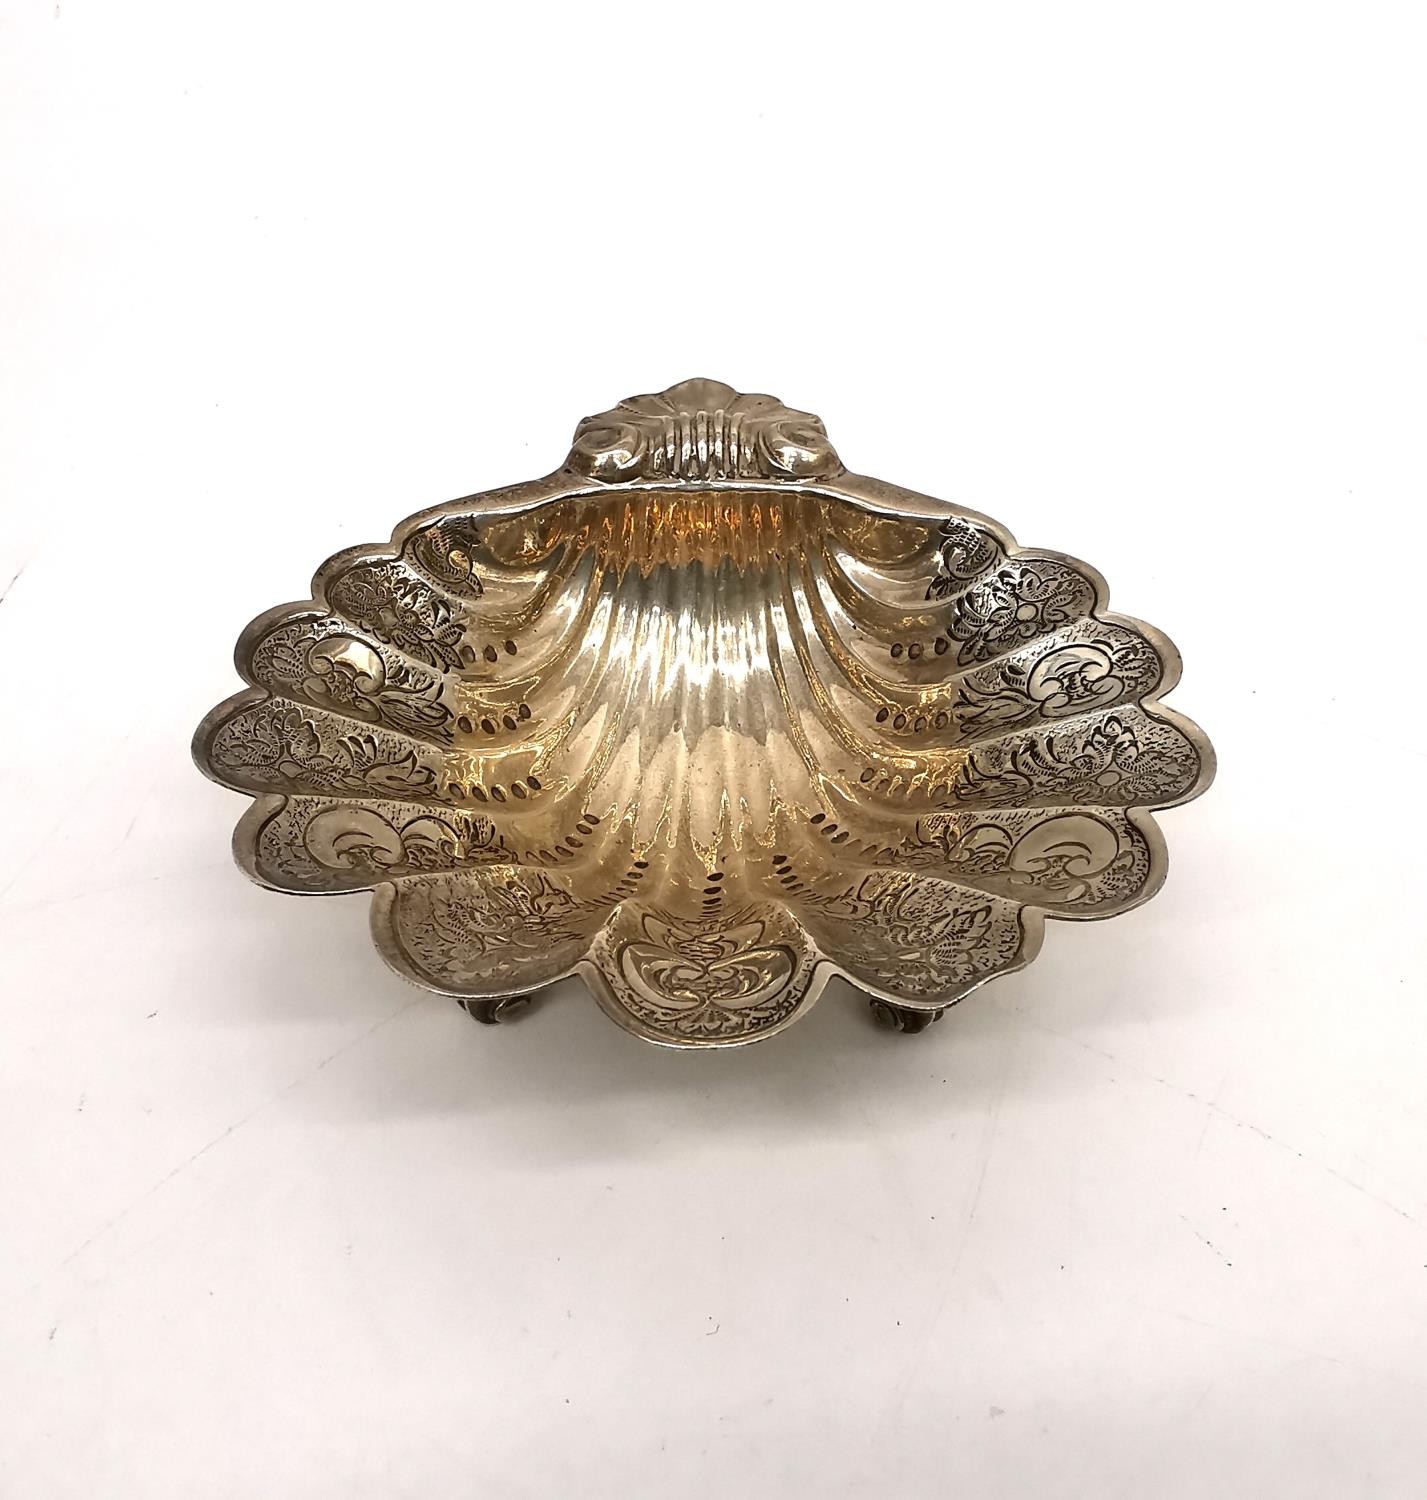 A vintage silver engraved clam shell form trinket dish by J B Chatterley & Sons Ltd. Engraved with a